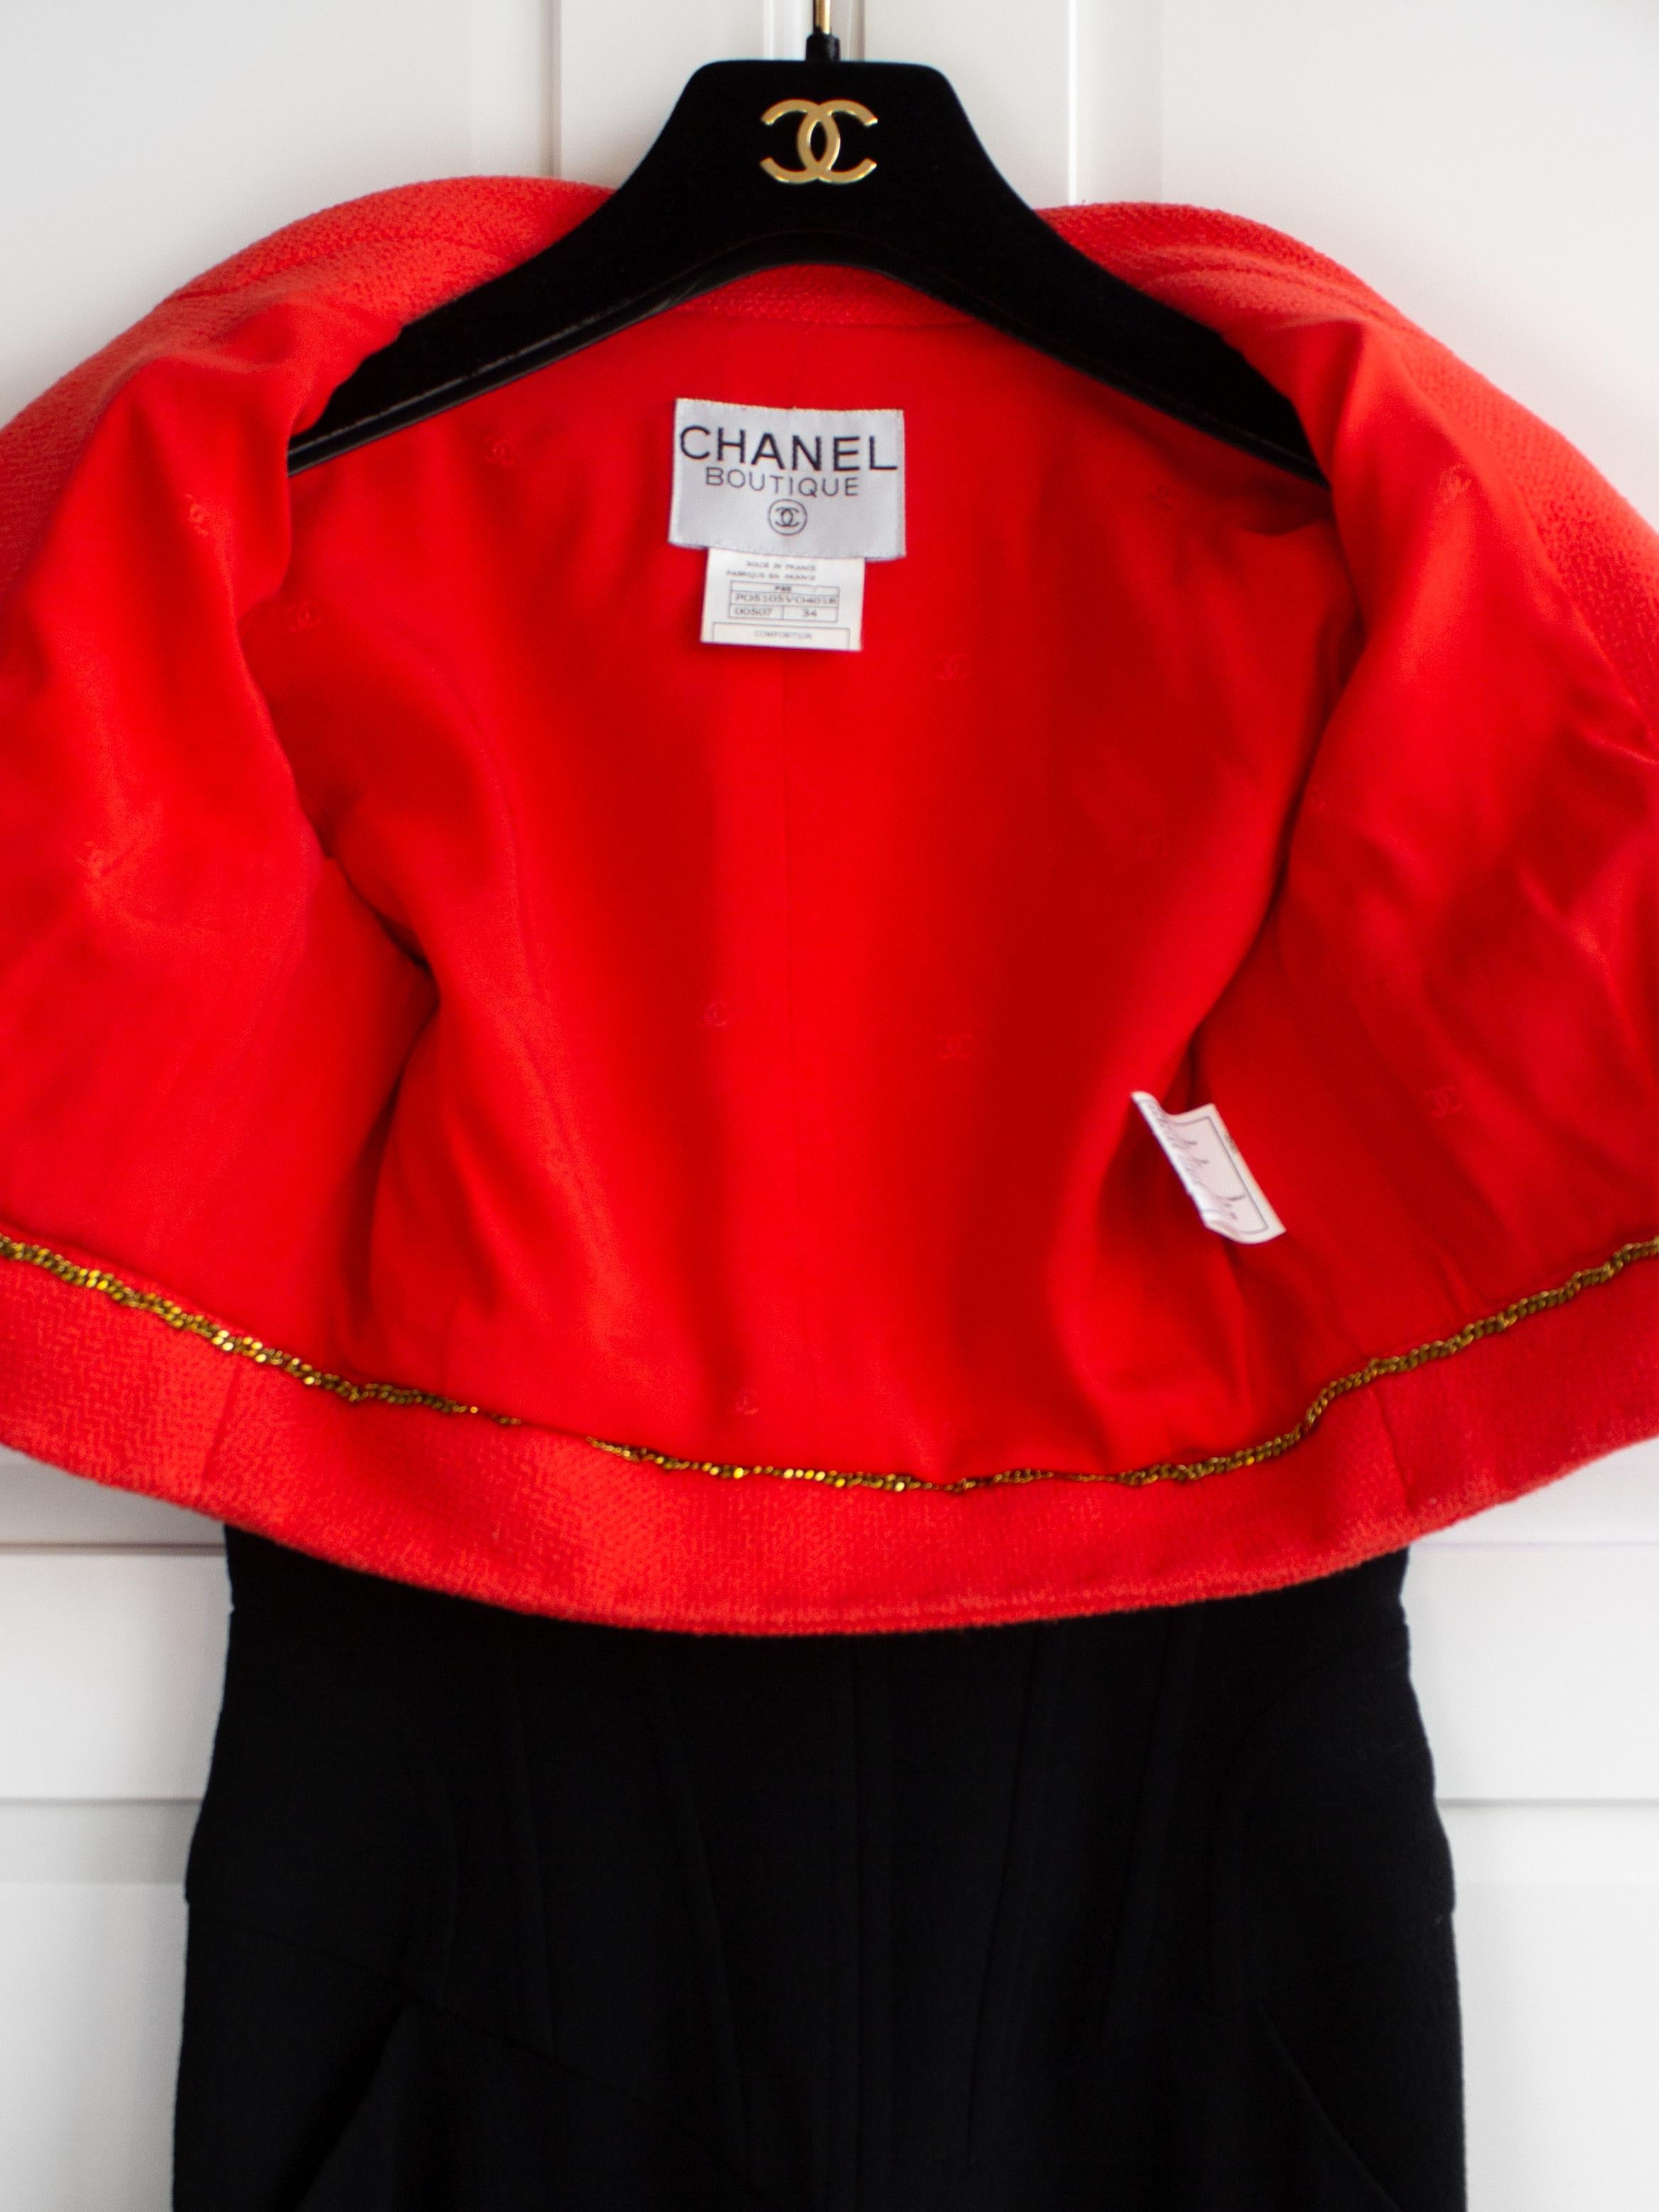 Iconic Chanel Vintage S/S 1995 Barbie Cropped Red Black 95P Jacket Corset Skirt  6